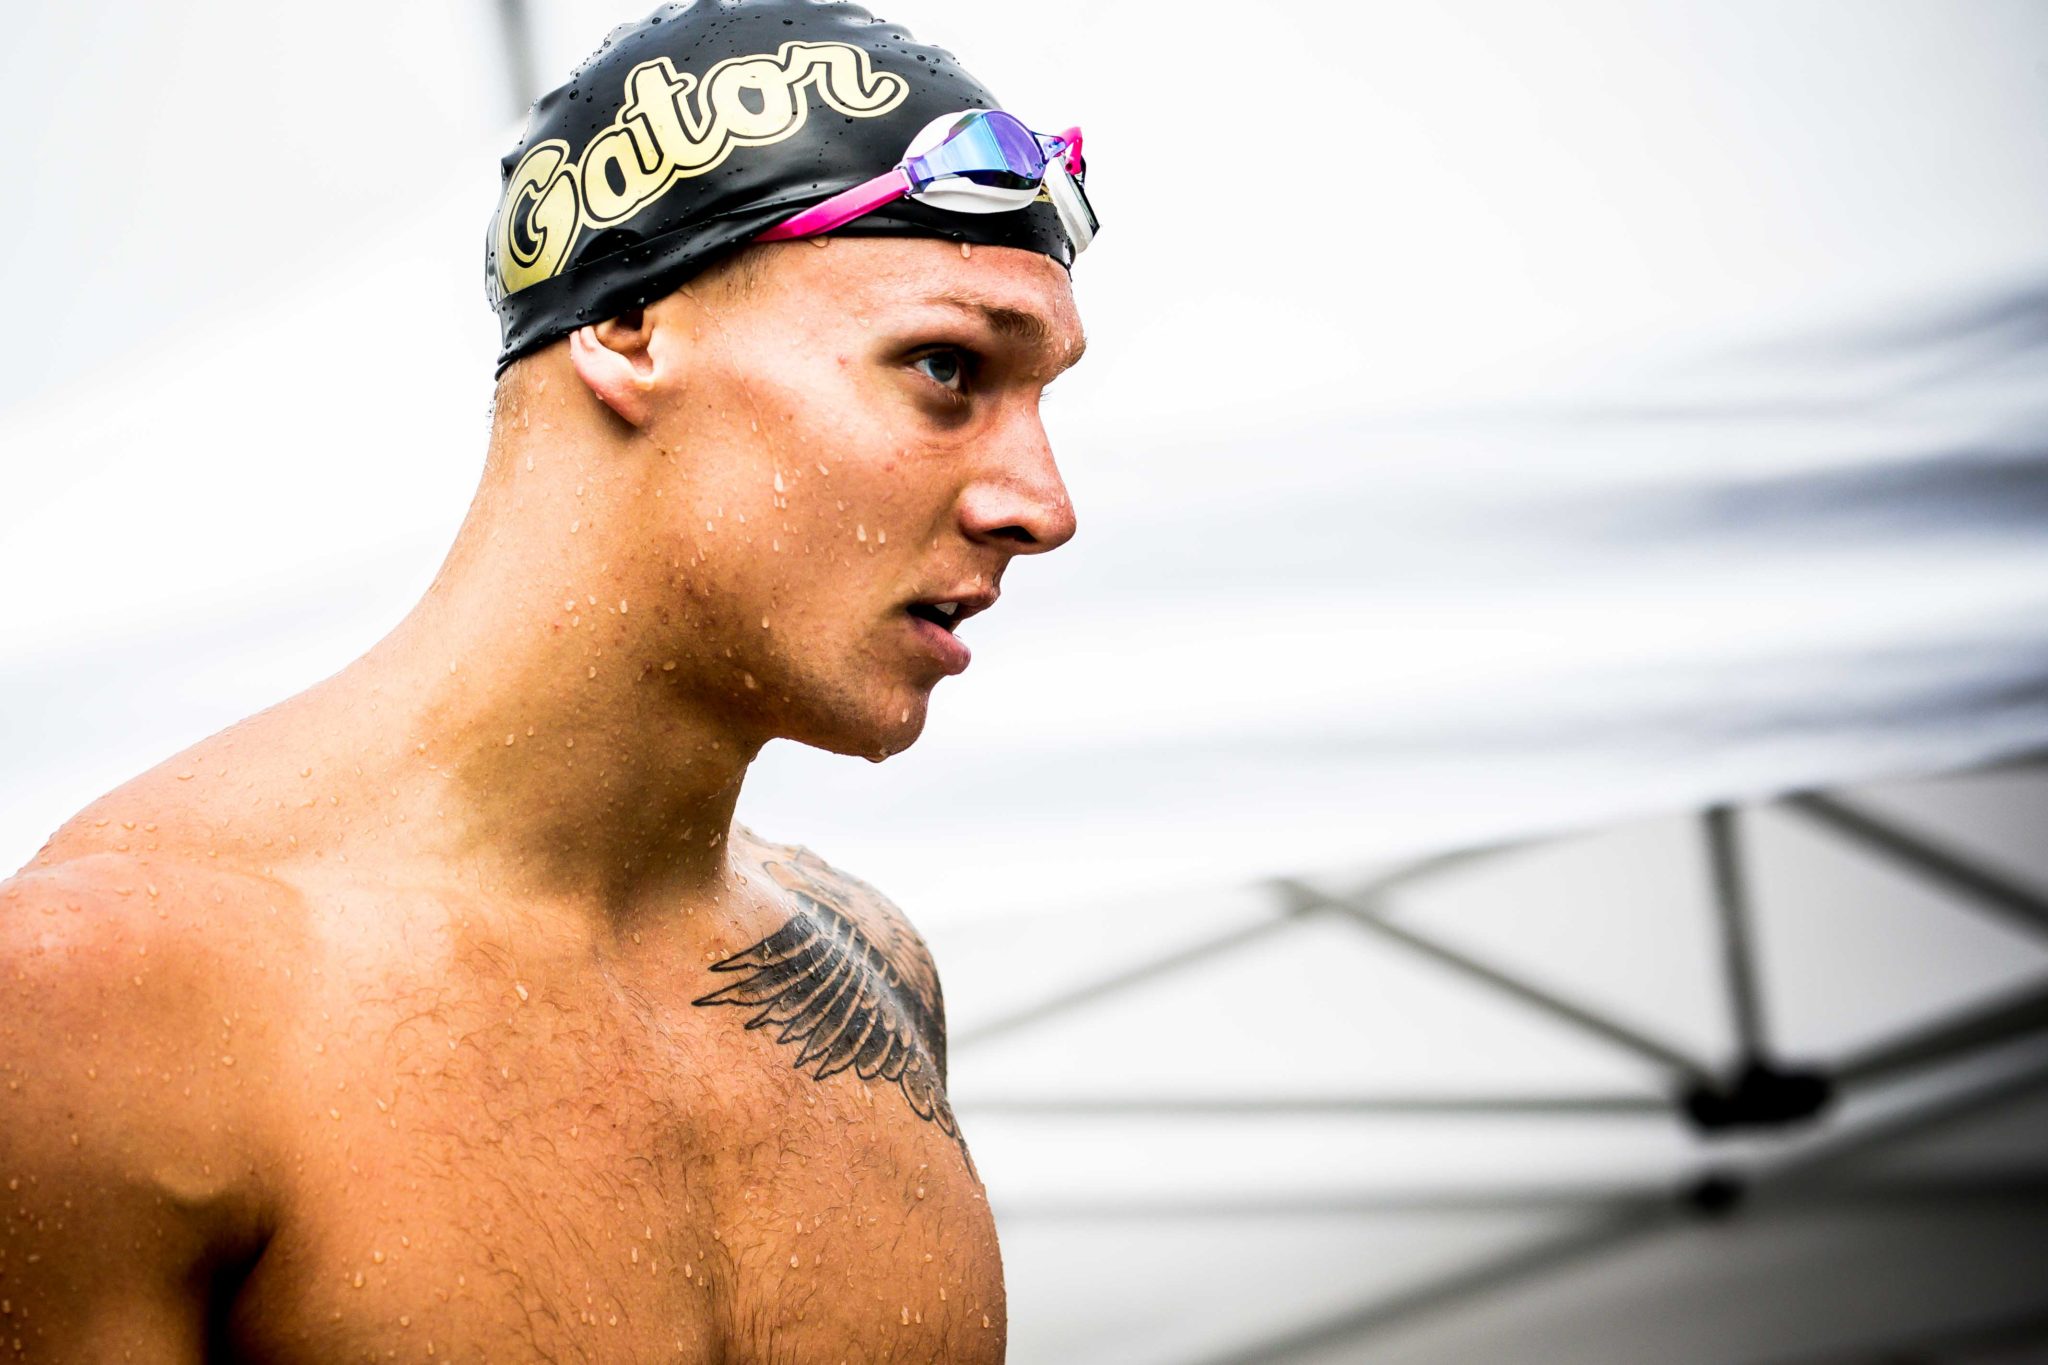 8 hours ago - caeleb dressel, one of the world's most dominant male sw...